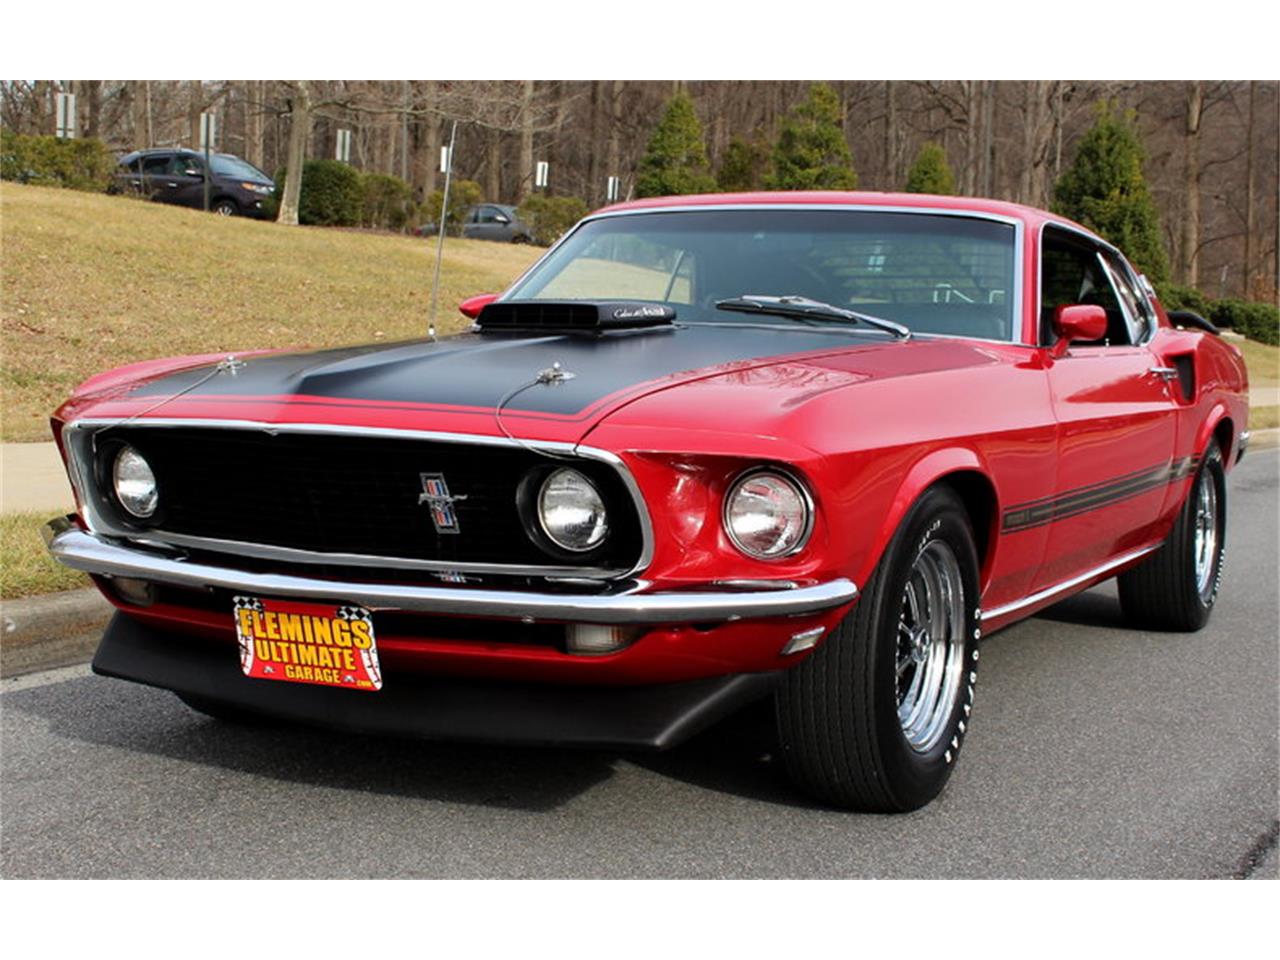 1969 Ford Mustang Mach 1 428 Cobra Jet for Sale | ClassicCars.com | CC